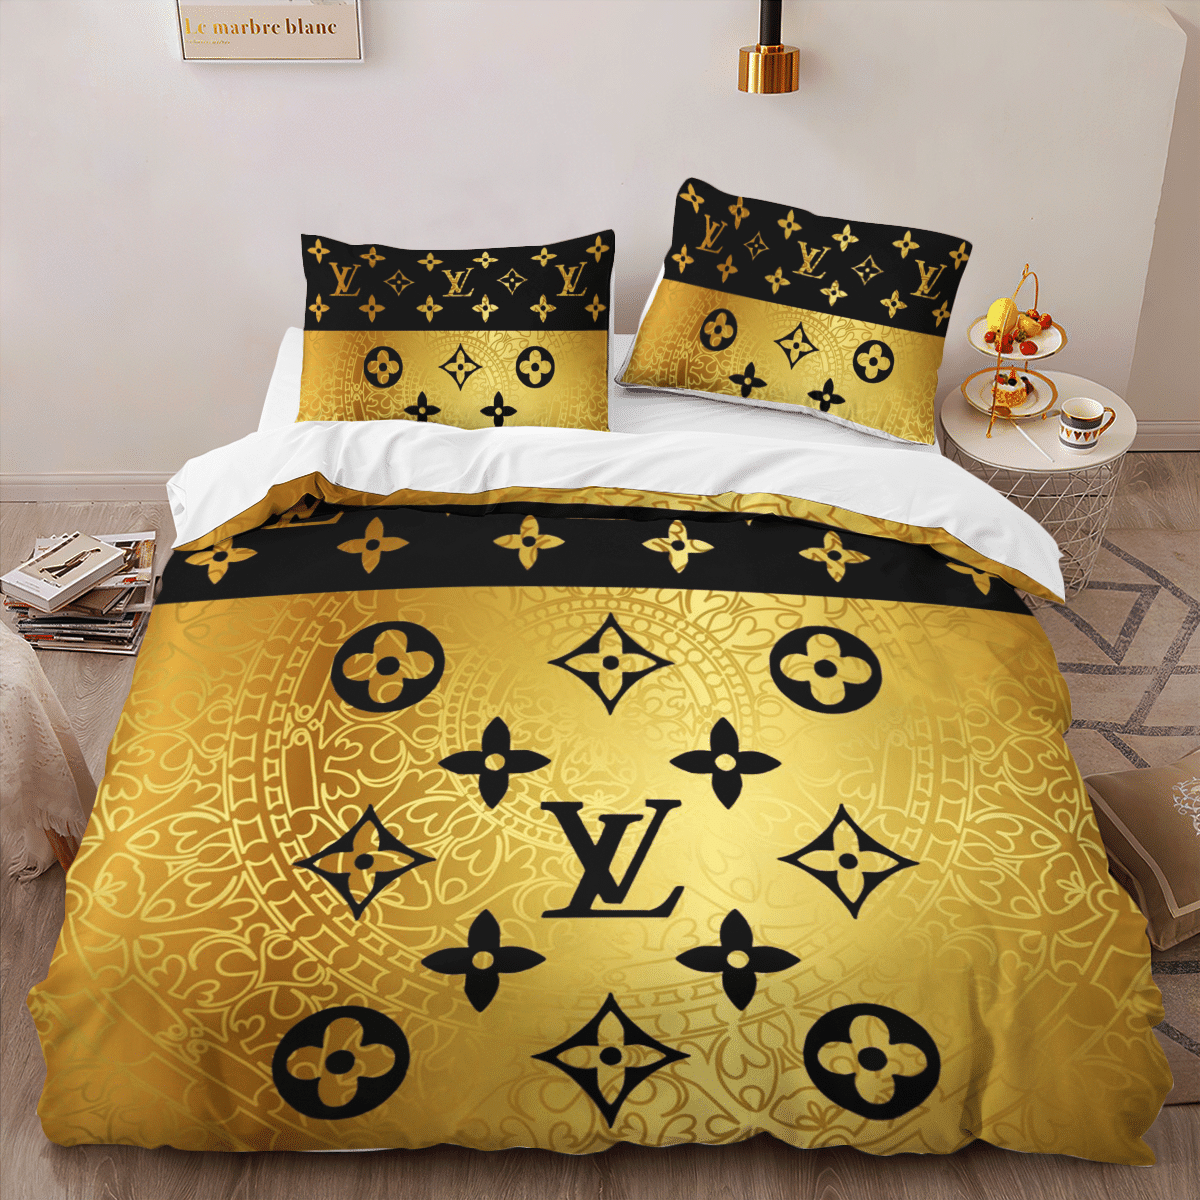 Bedset24 Limited Edition 3D Customized Bedding Sets – Gift4Family